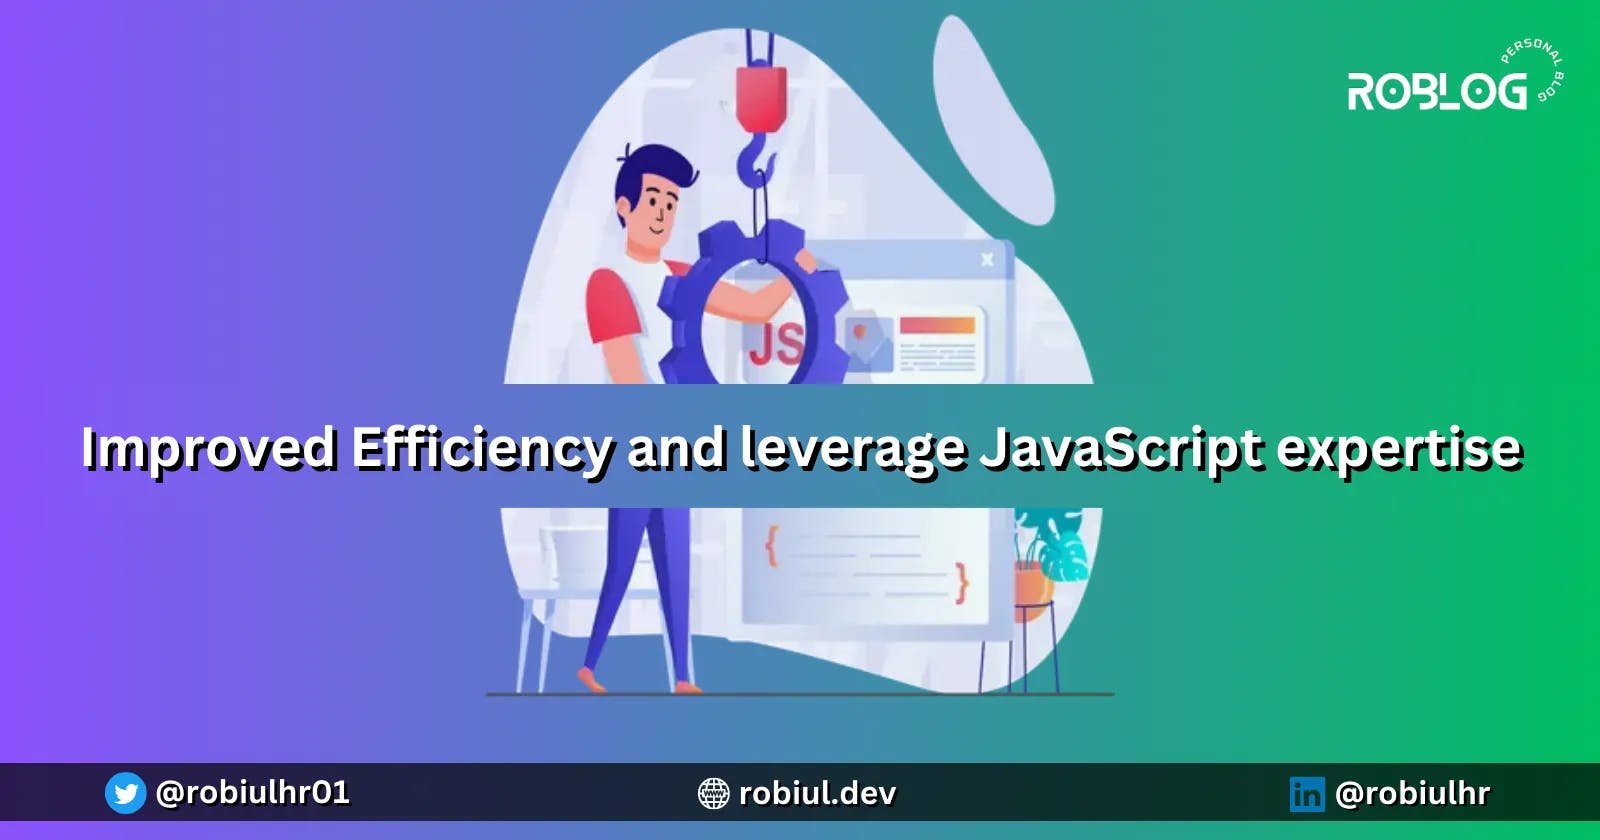 Improved Efficiency and leverage JavaScript expertise